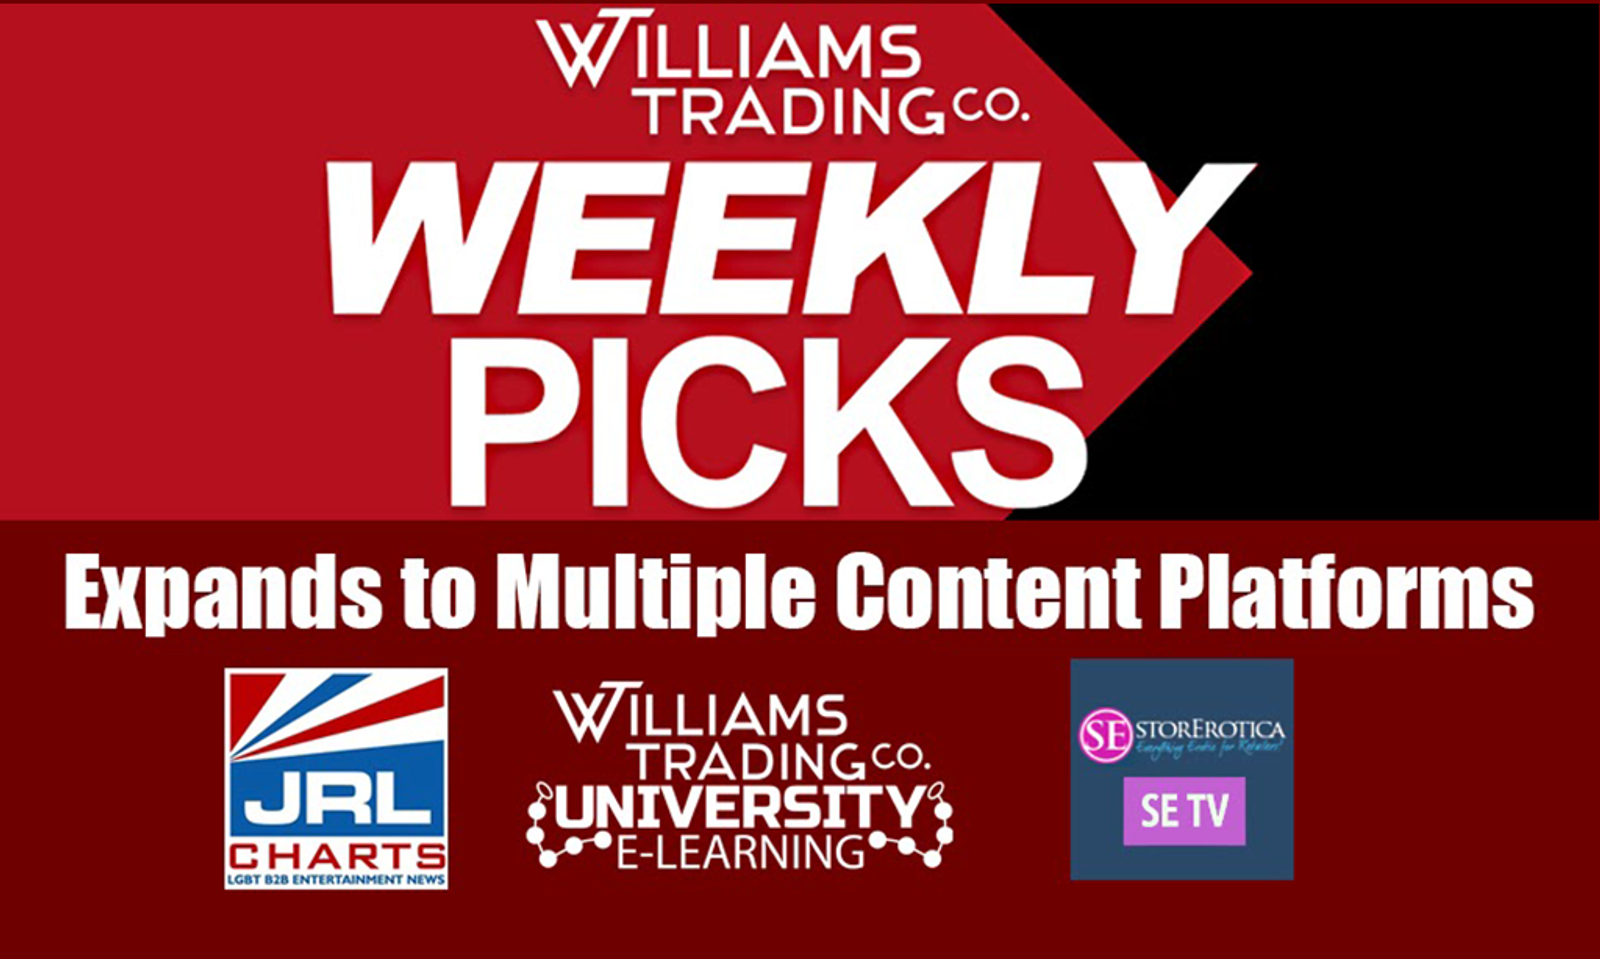 Williams Trading Weekly Picks Now on Multiple Content Platforms